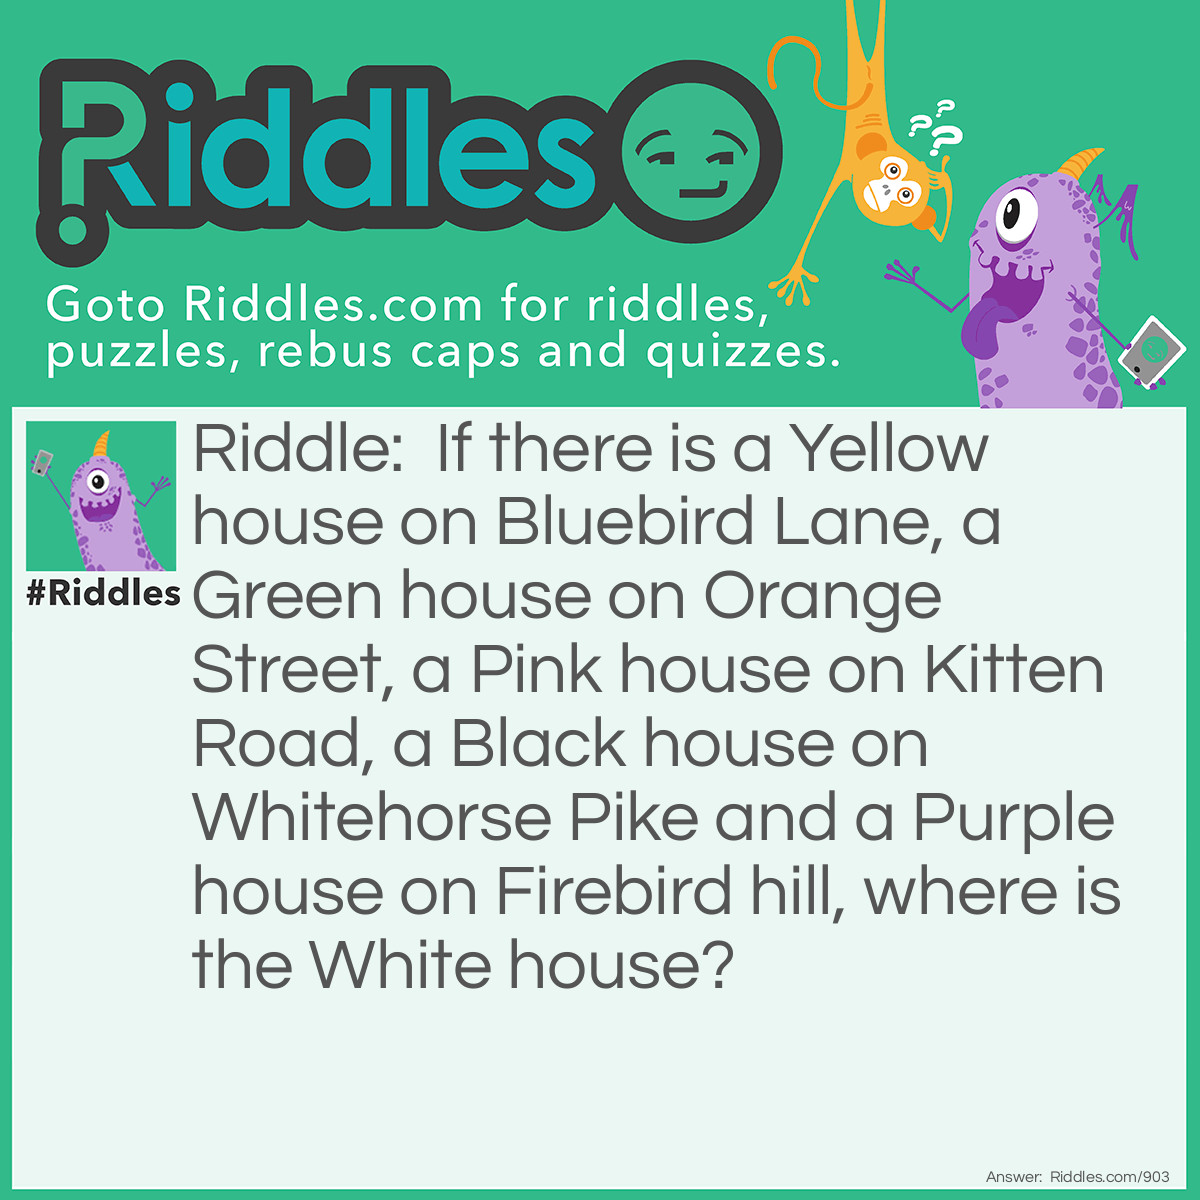 Riddle: If there is a Yellow house on Bluebird Lane, a Green house on Orange Street, a Pink house on Kitten Road, a Black house on Whitehorse Pike and a Purple house on Firebird hill, where is the White house? Answer: Washington, D.C.